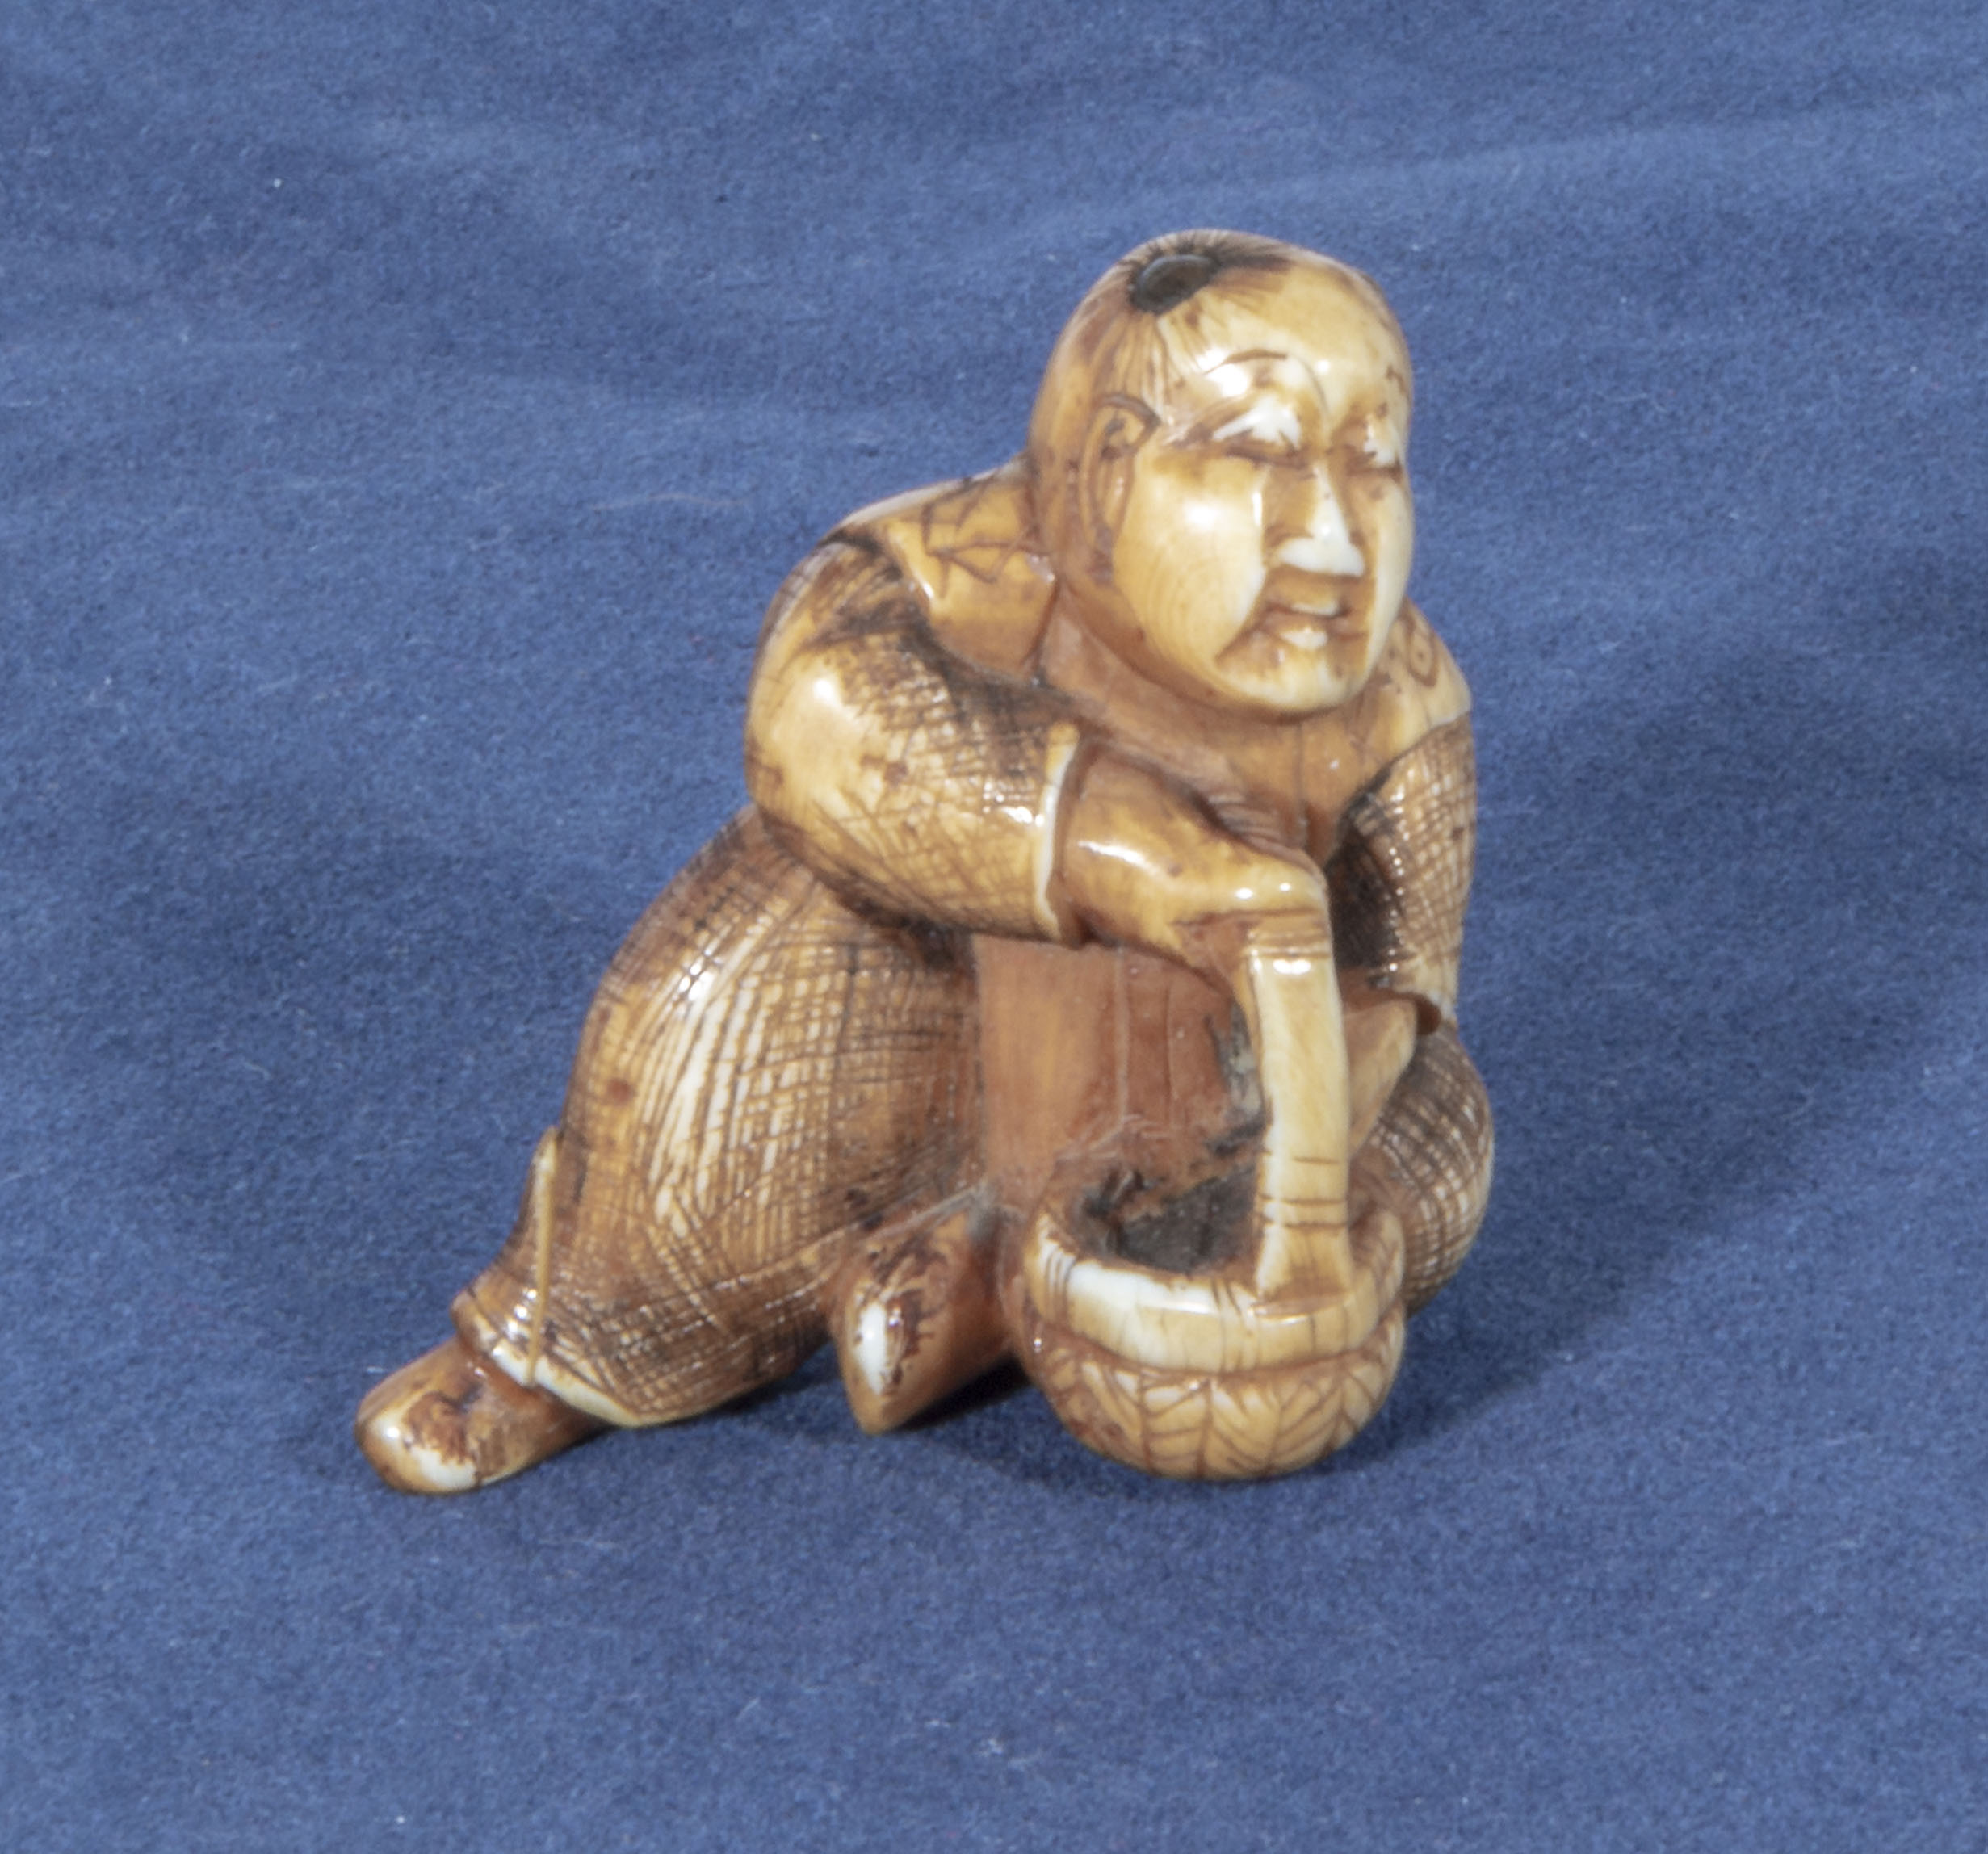 An antique netsuke depicting a man with small horn roundells onlaid on his head carrying a basket,